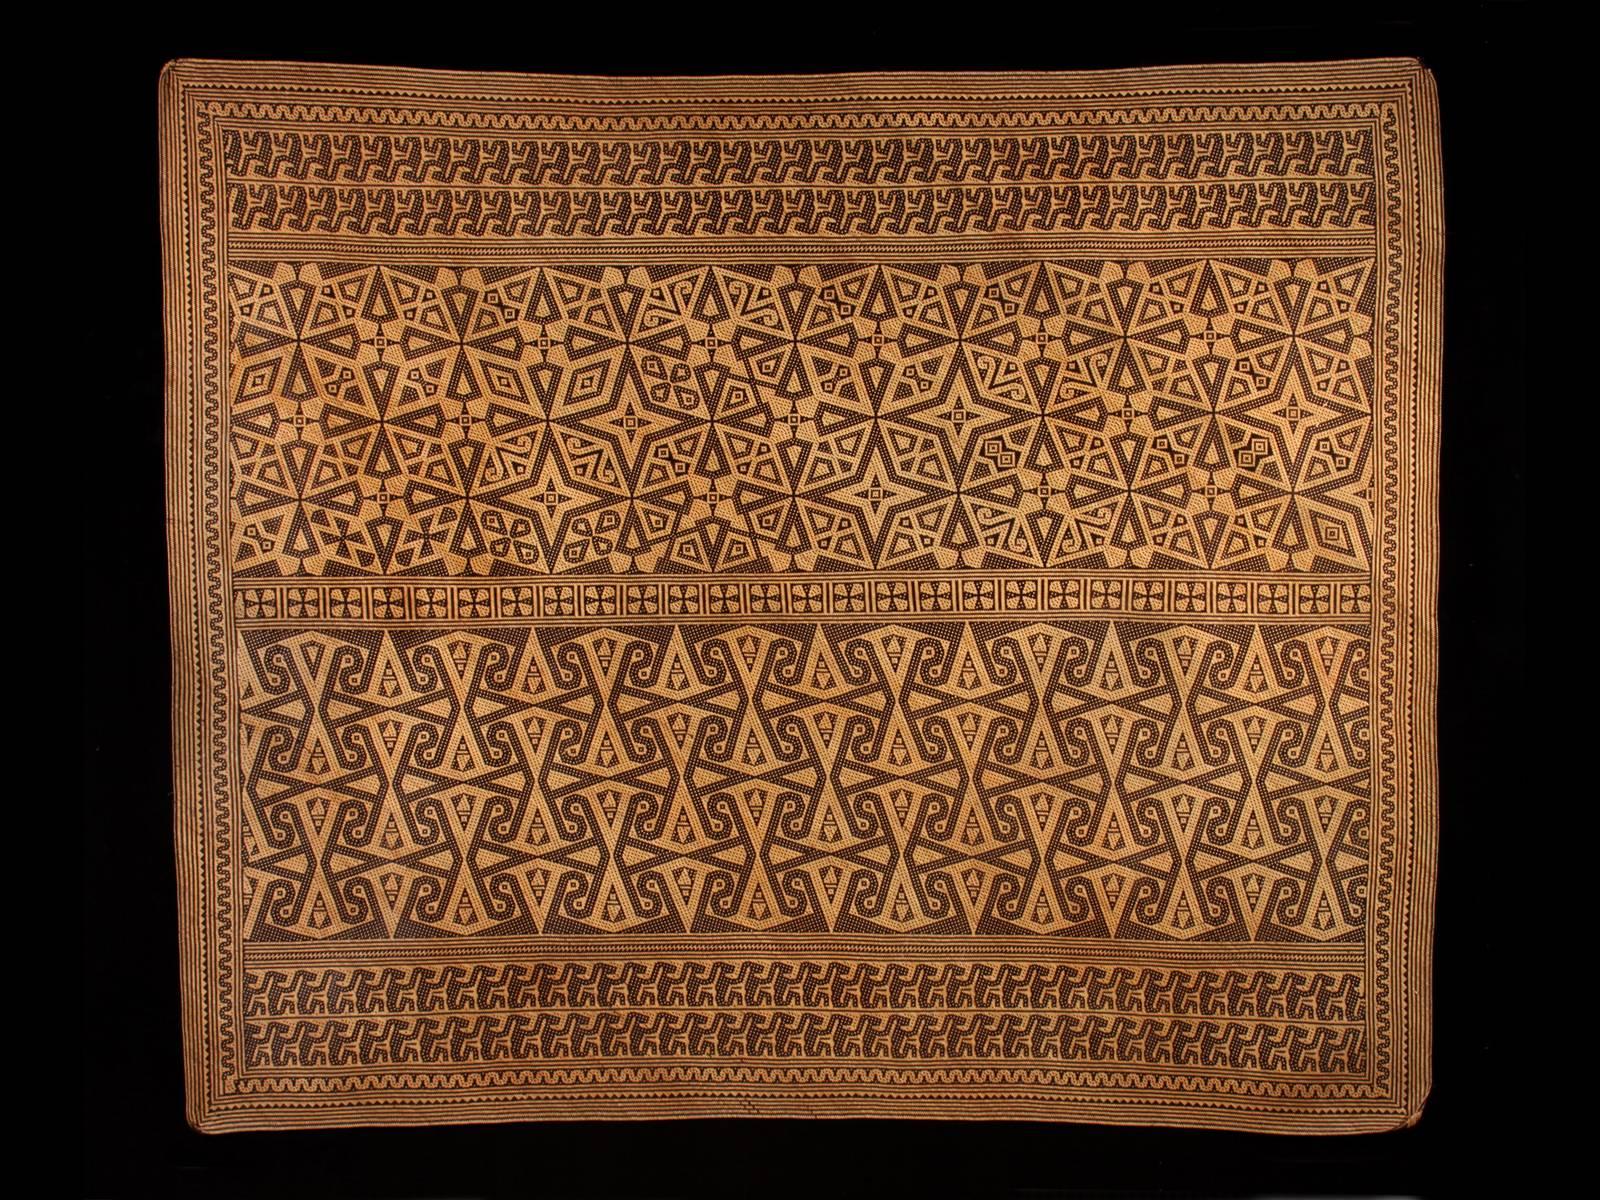 Offered by Zena Kruzick
Early to mid-20th century tribal ceremonial rattan wedding mat (Tikar Adat)
Dayak, Punan people, Kalimantan, Borneo

The Escher-like monkey/dog borders on this visually engaging sleeping mat hint at the complexity of the